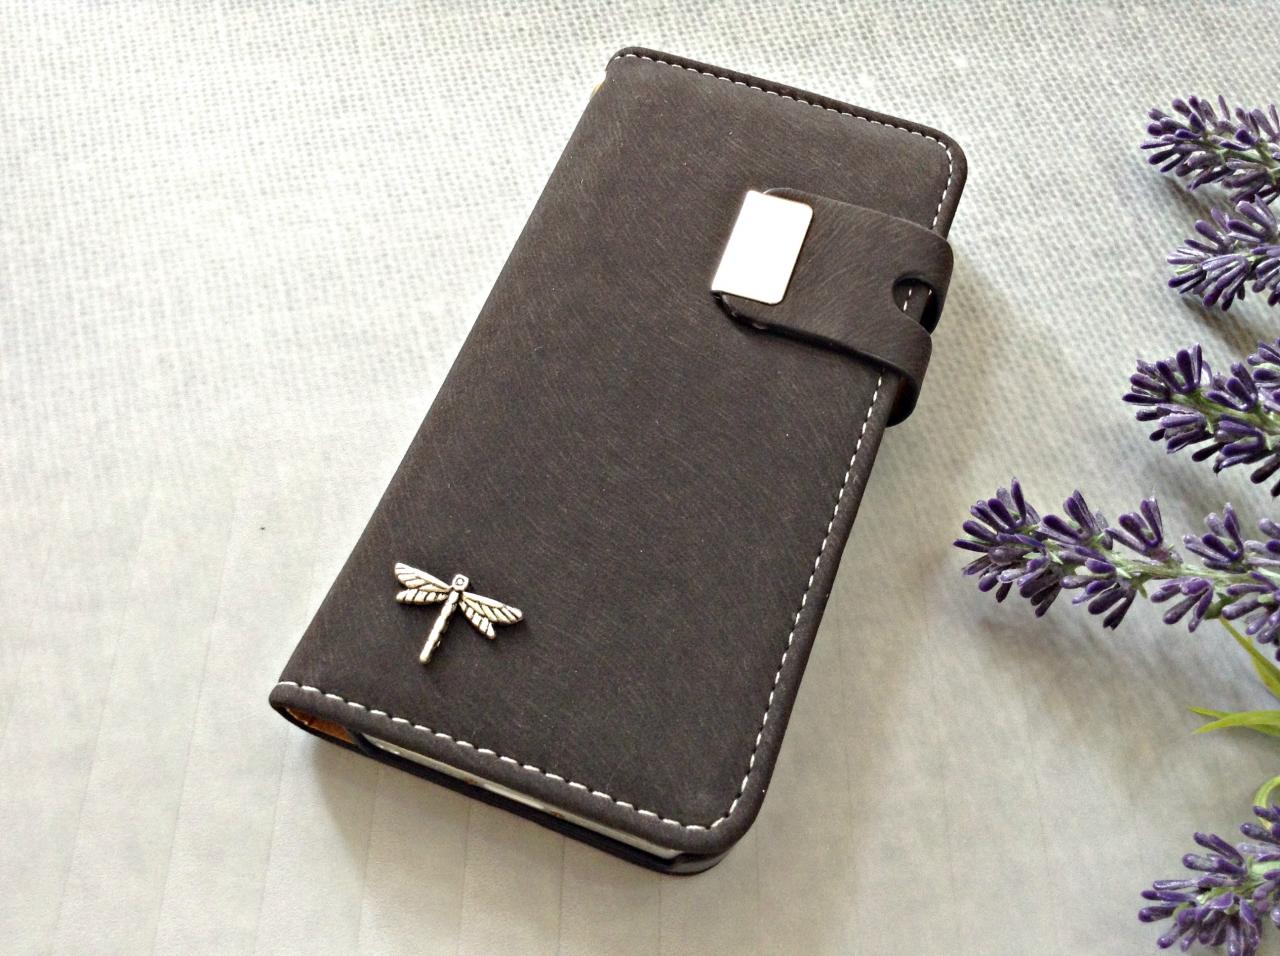 Dragonfly Iphone 5 5s Wallet Case, Iphone 5s Case, Iphone 5 Case